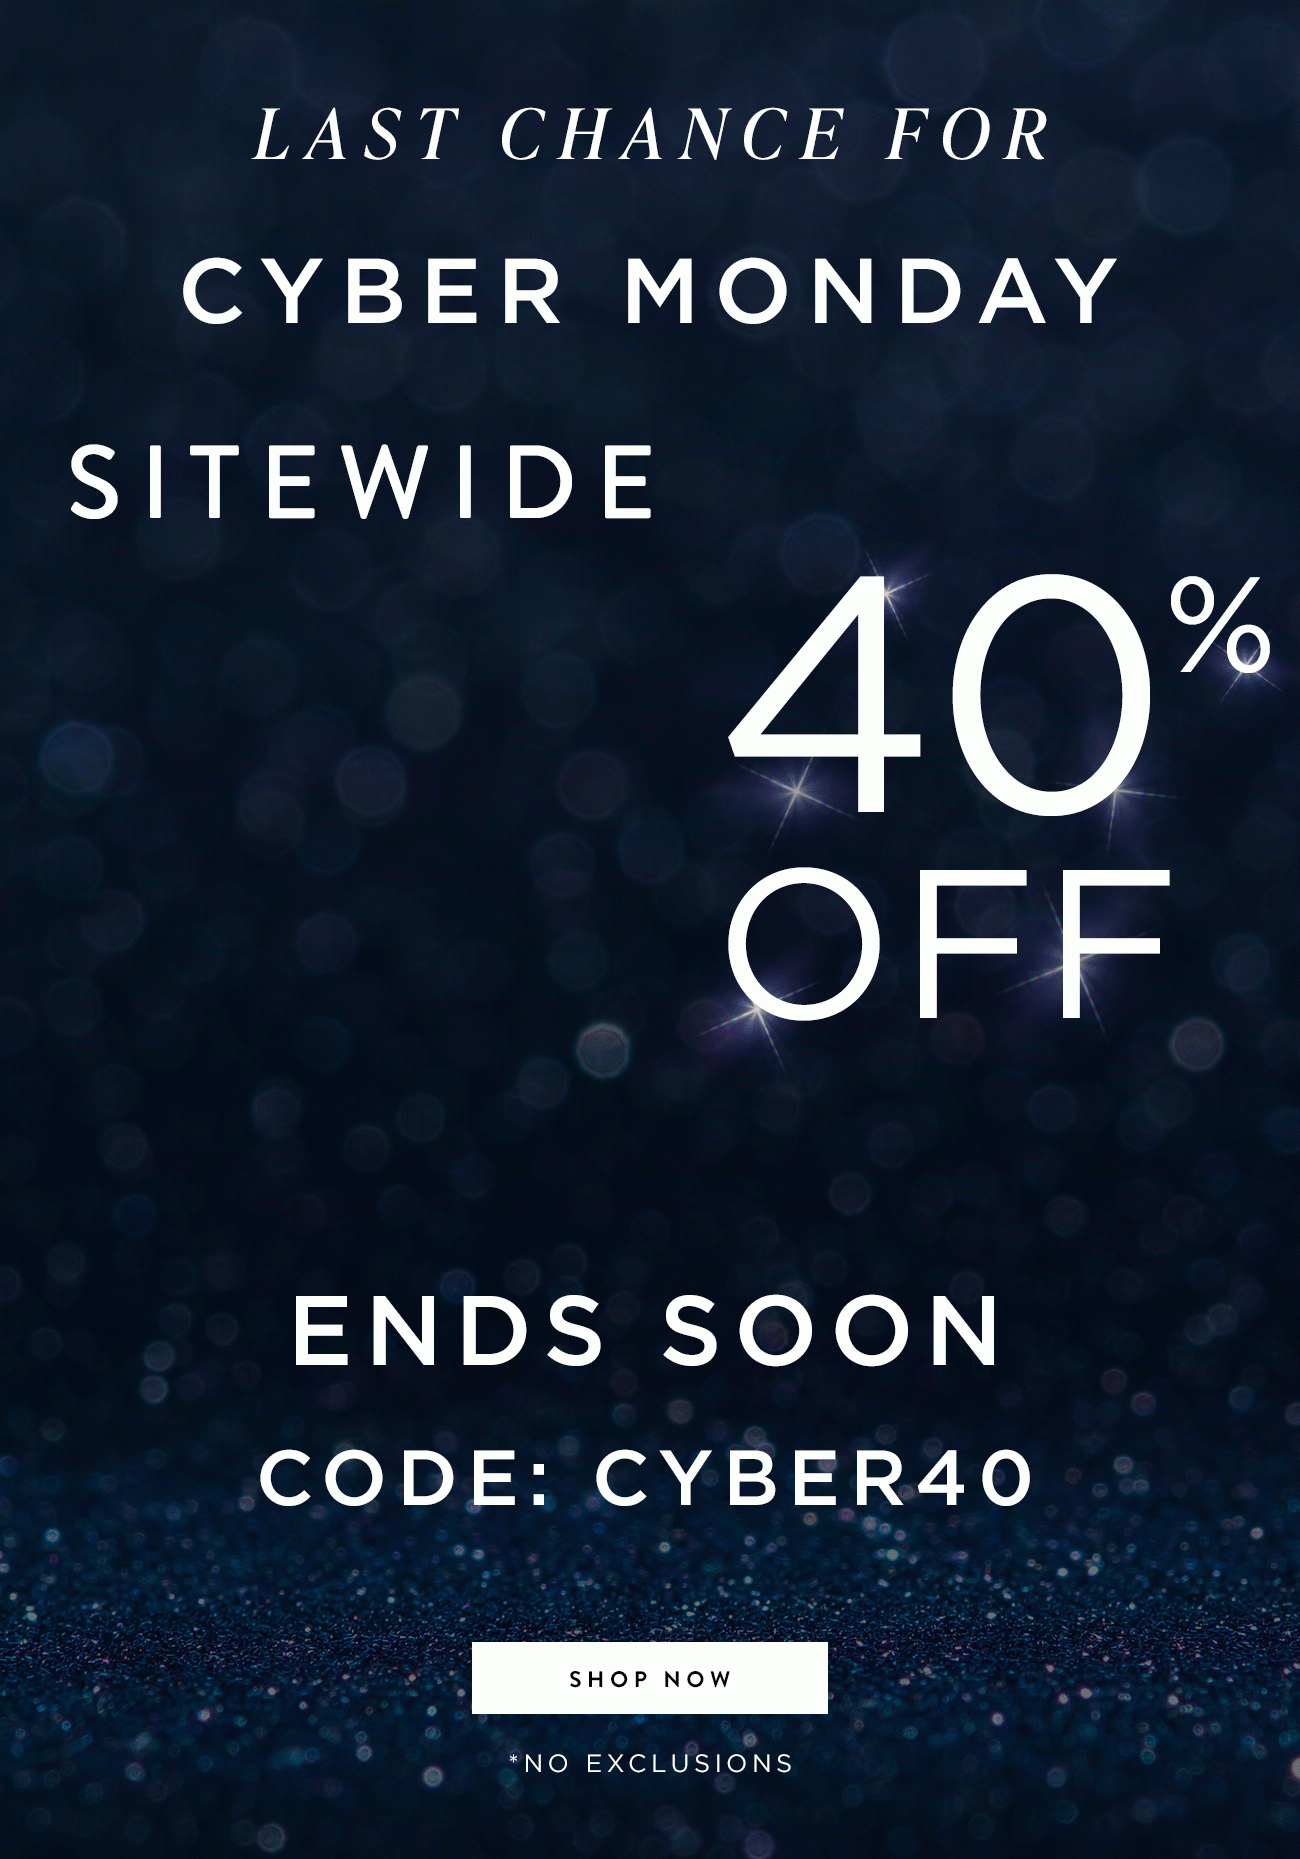 Last Chance - Cyber Monday - 40% Off Sitewide Ends Soon